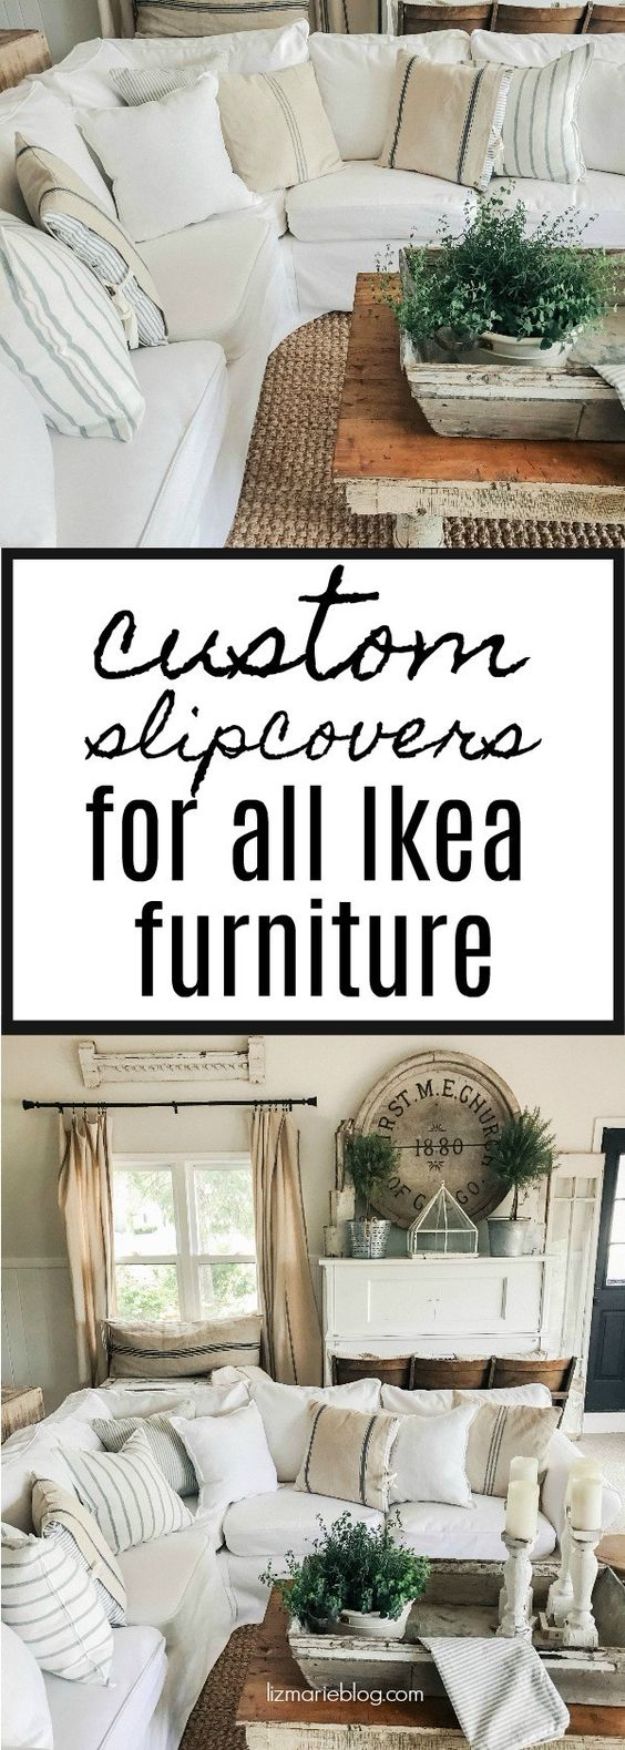 DIY Slipcovers - Custom Ikea Furniture Slipcovers - Do It Yourself Slip Covers For Furniture - No Sew Ideas, Easy Fabrics Four Couch and Sofa Cover - Chair Projects and Ideas, How To Make a Slip cover with step by step tutorial and instructions - Cool DIY Home and Living Room Decor #slipcovers #diydecor